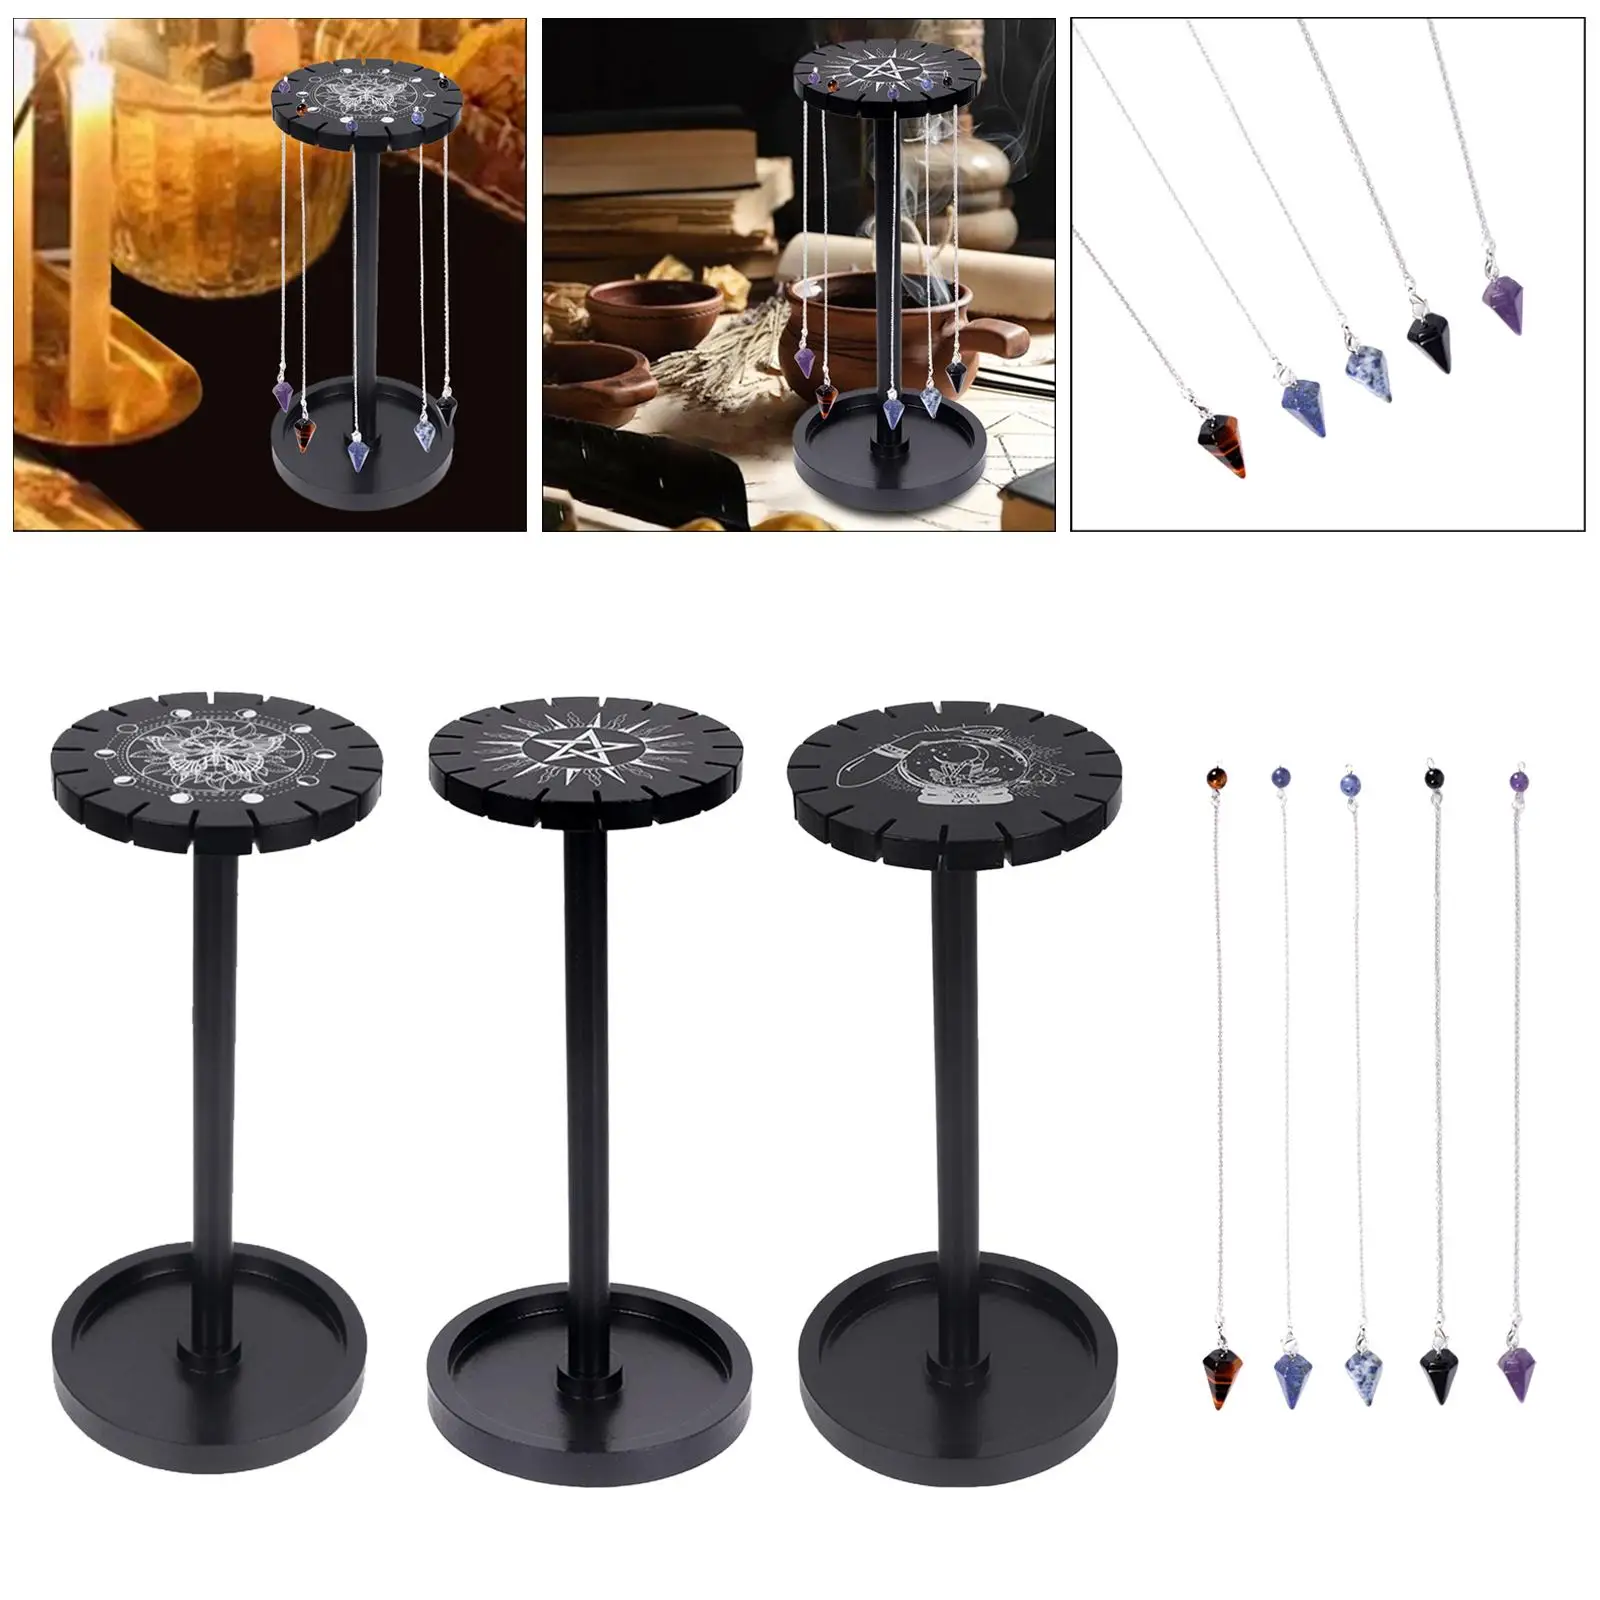 Multipurpose Wooden Pendulum Display Frame Stone Bracket Ornament Display Shelf Holder Stand for Collections Mineral Home Decor